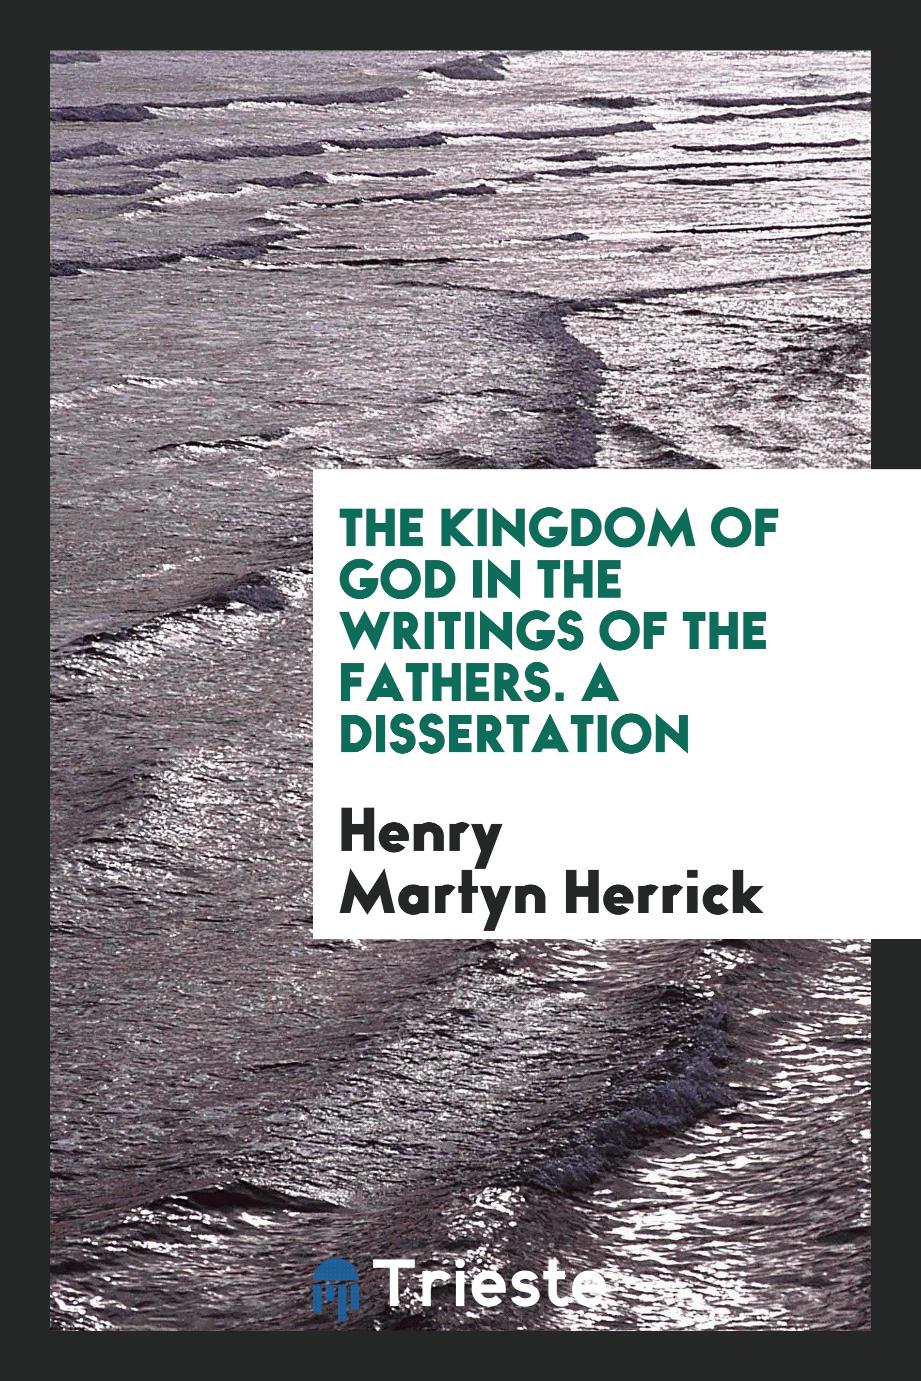 The Kingdom of God in the Writings of the Fathers. A Dissertation